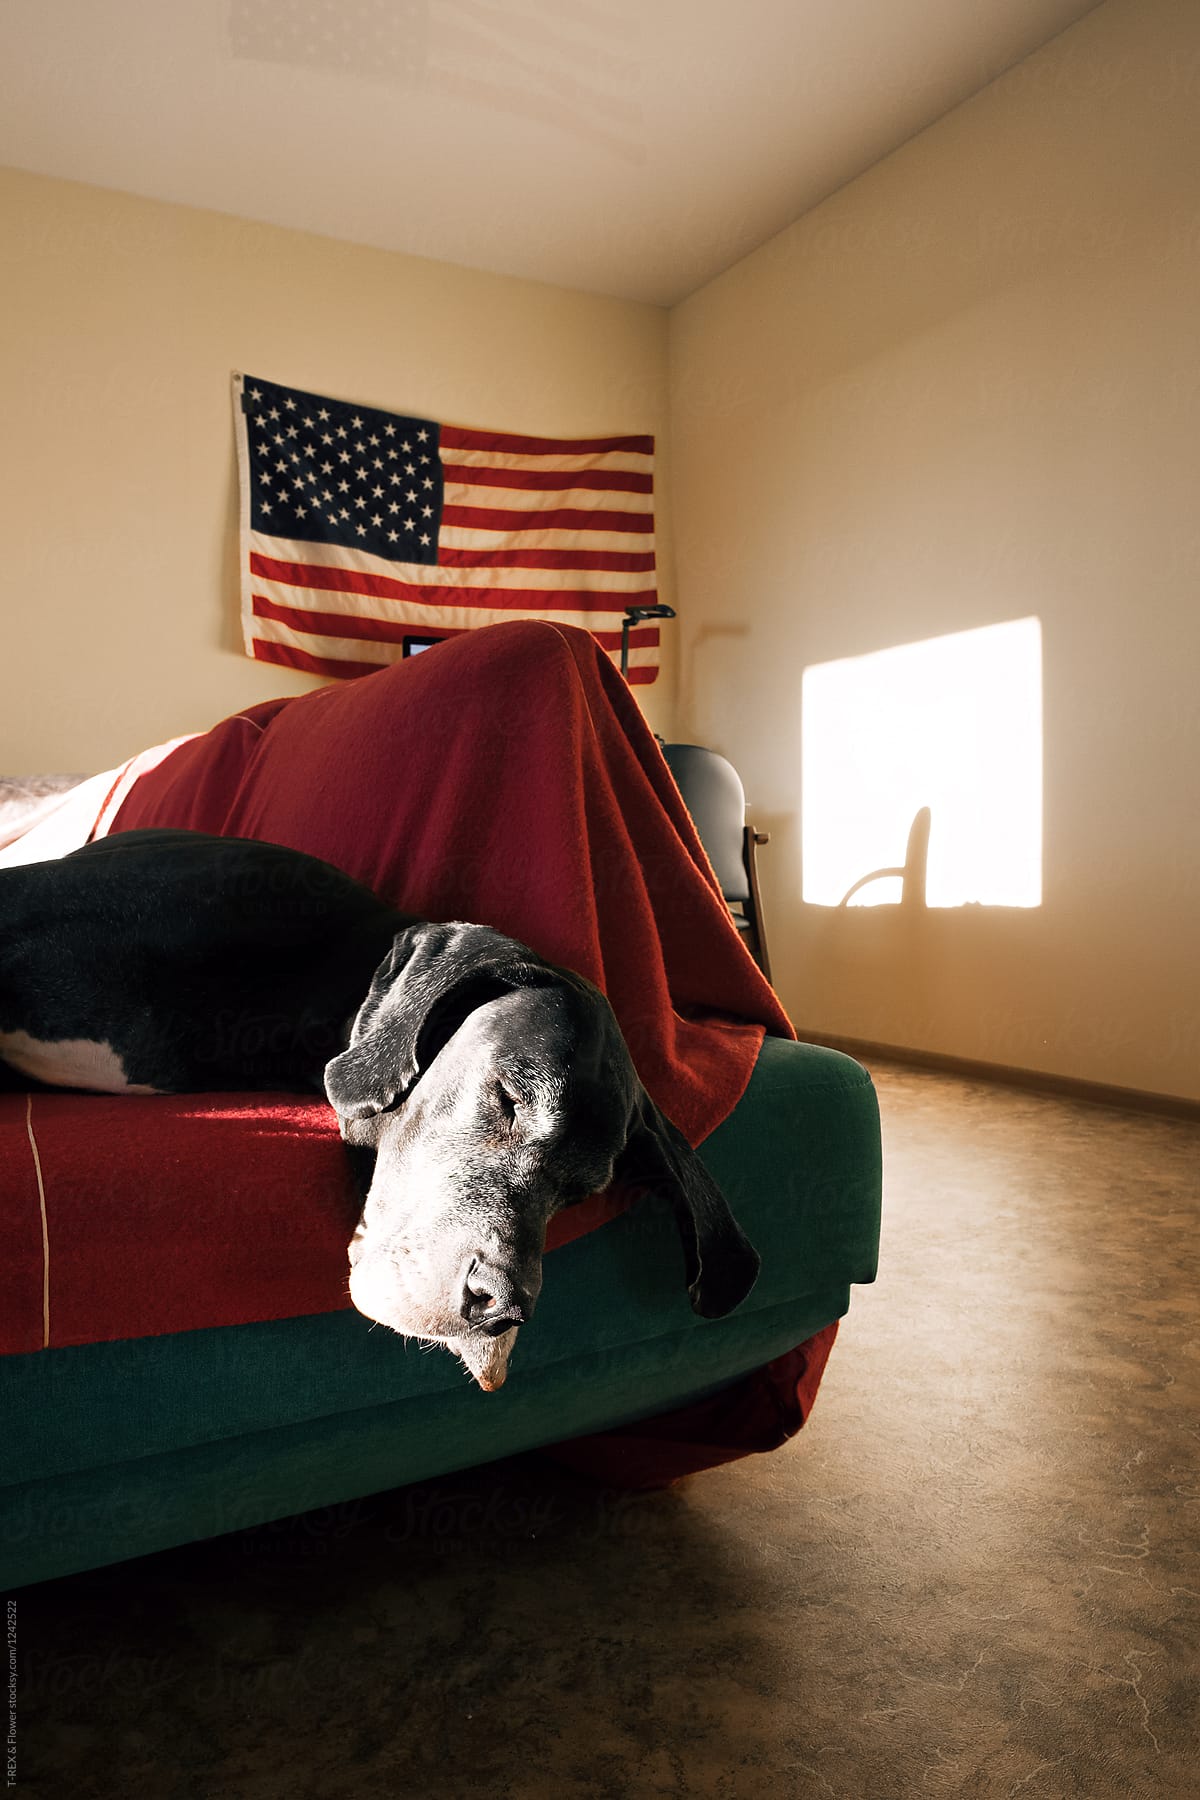 Sleeping dog in the morning. Fourth of July